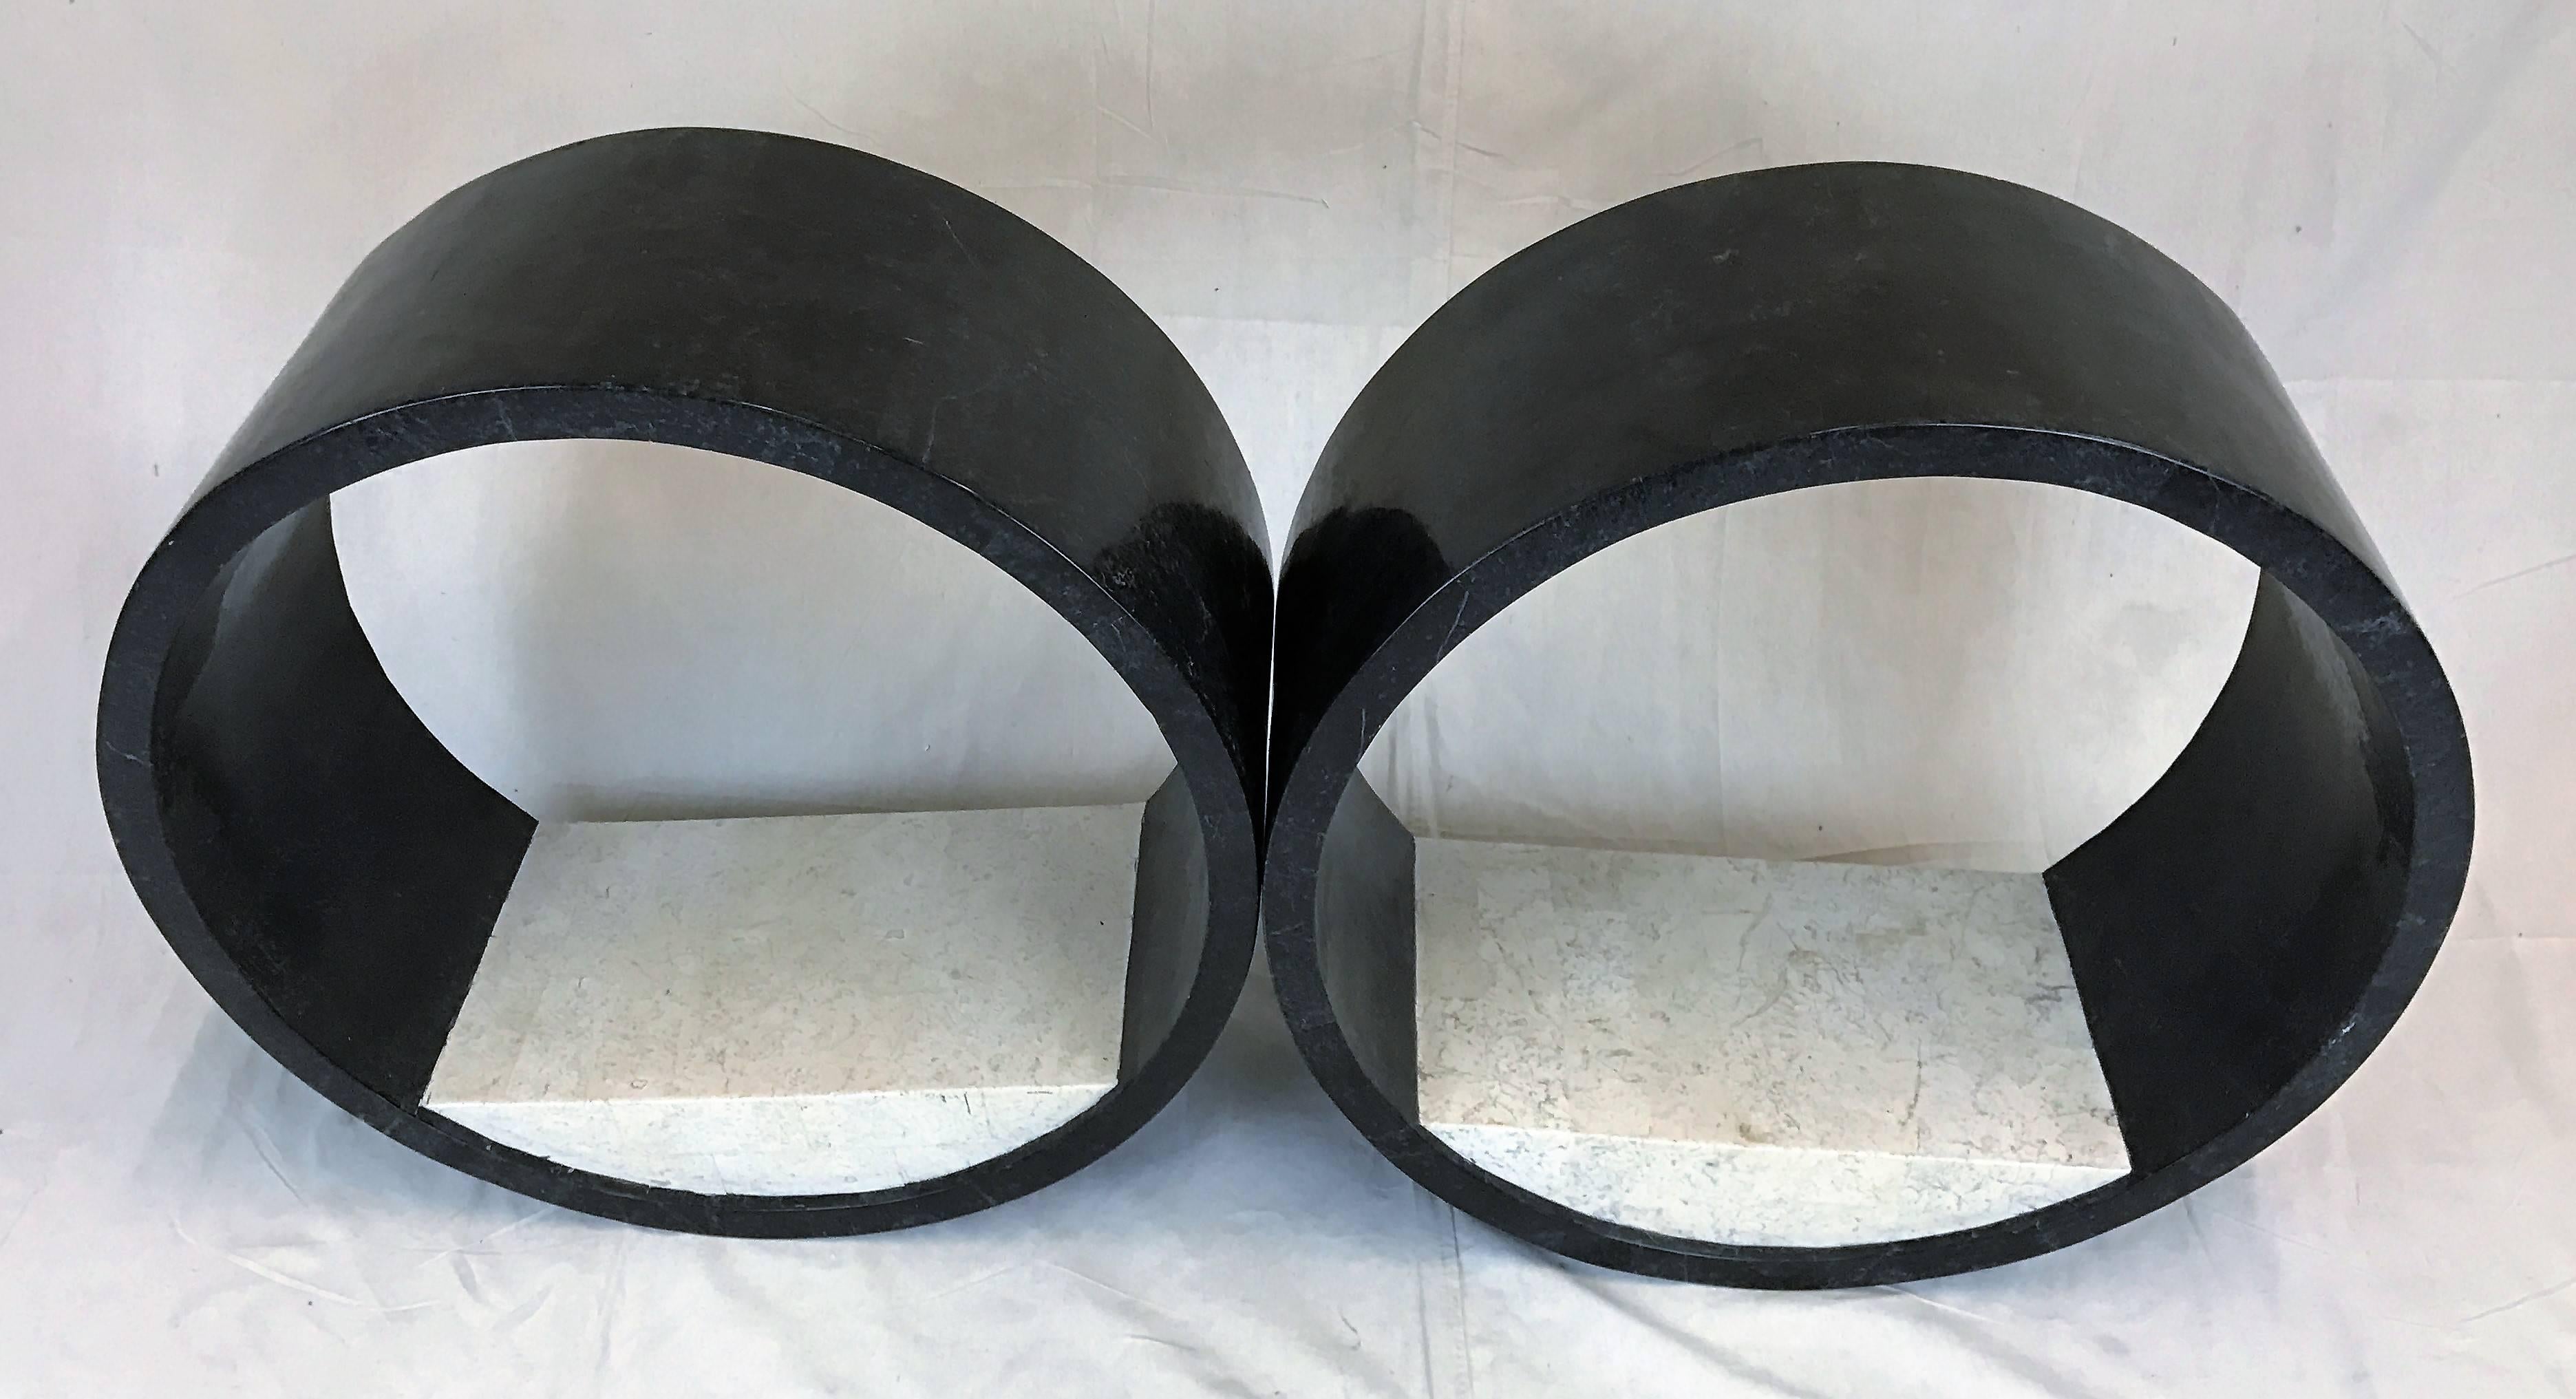 Lovely rare tessellated round shelving from the Marquis Collection of Beverly Hills. The circular black and white stone provides a modern movement to display curios. The Marquis collection is made from 100% natural stones painstakingly hand cut